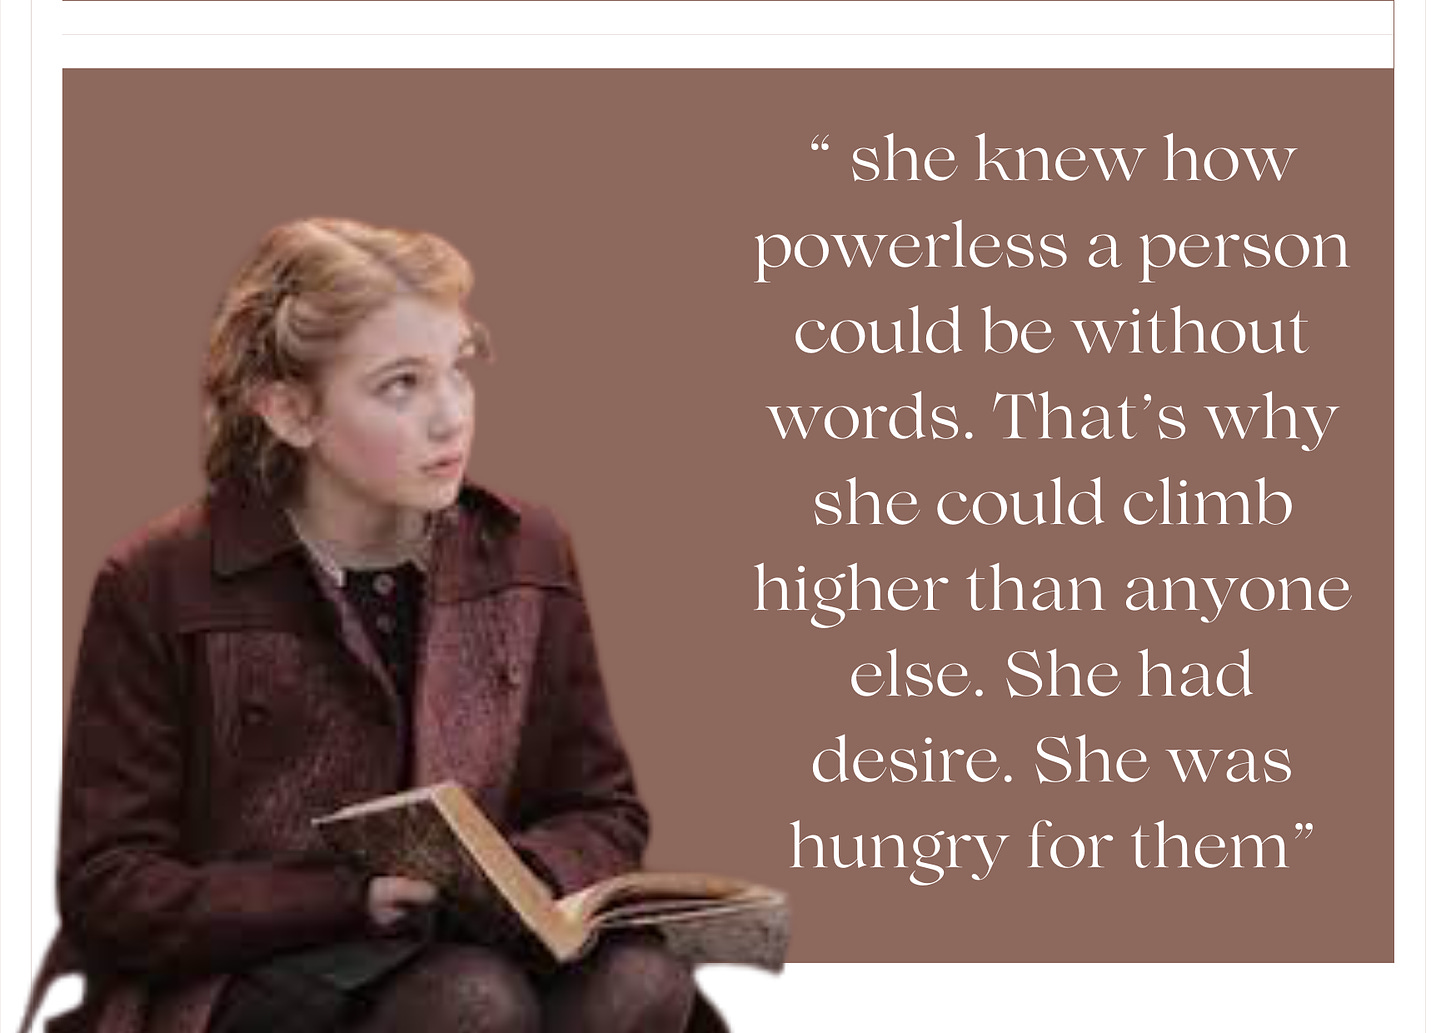 Liesel Meminger from The Book Thief quotes